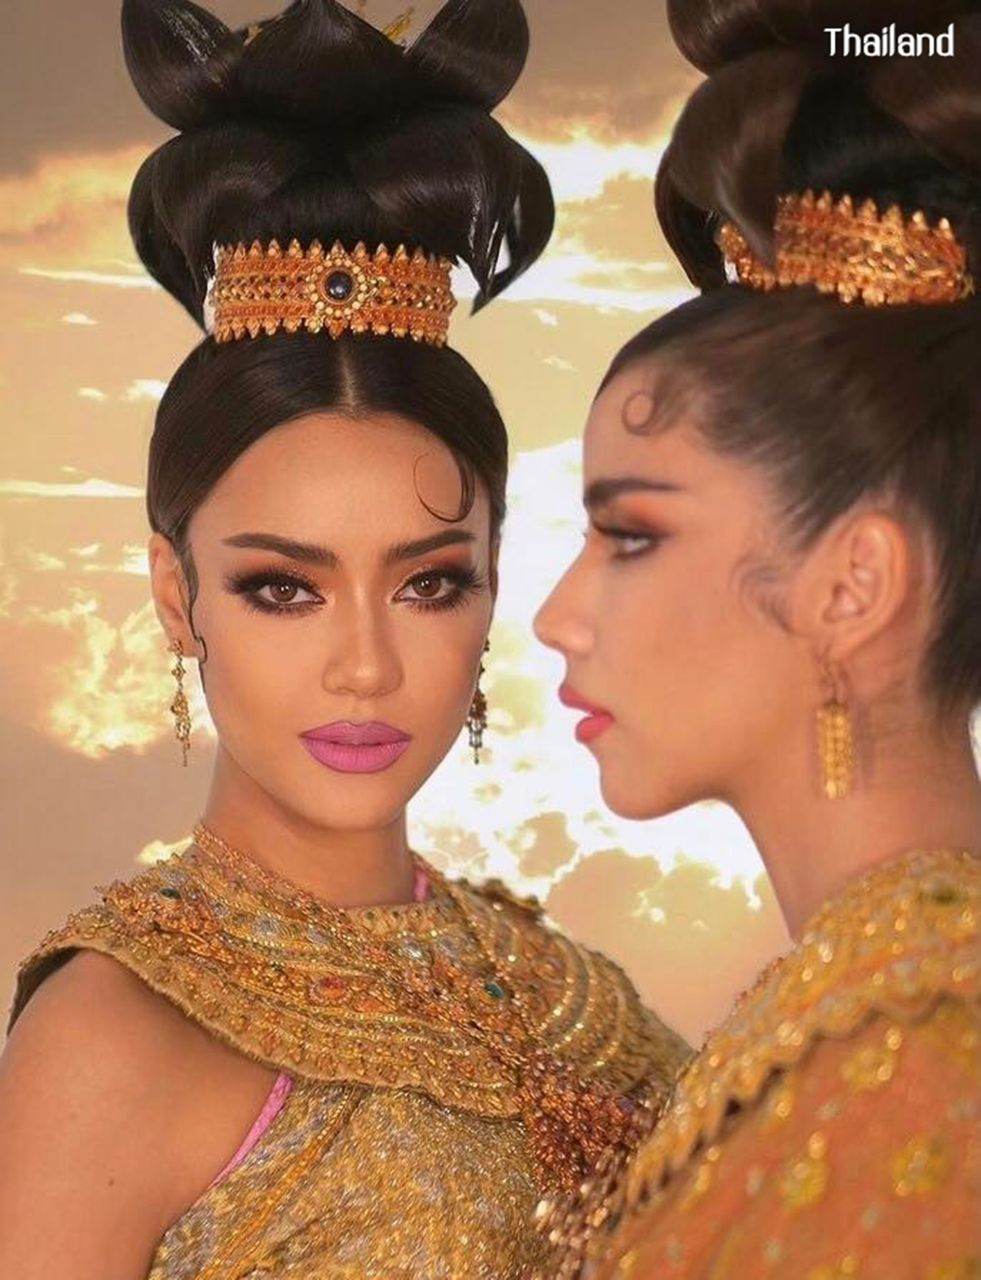 Gorgeous of 70's Hairstyle and Thai Dress in Loy Krathong Festival | THAILAND 🇹🇭